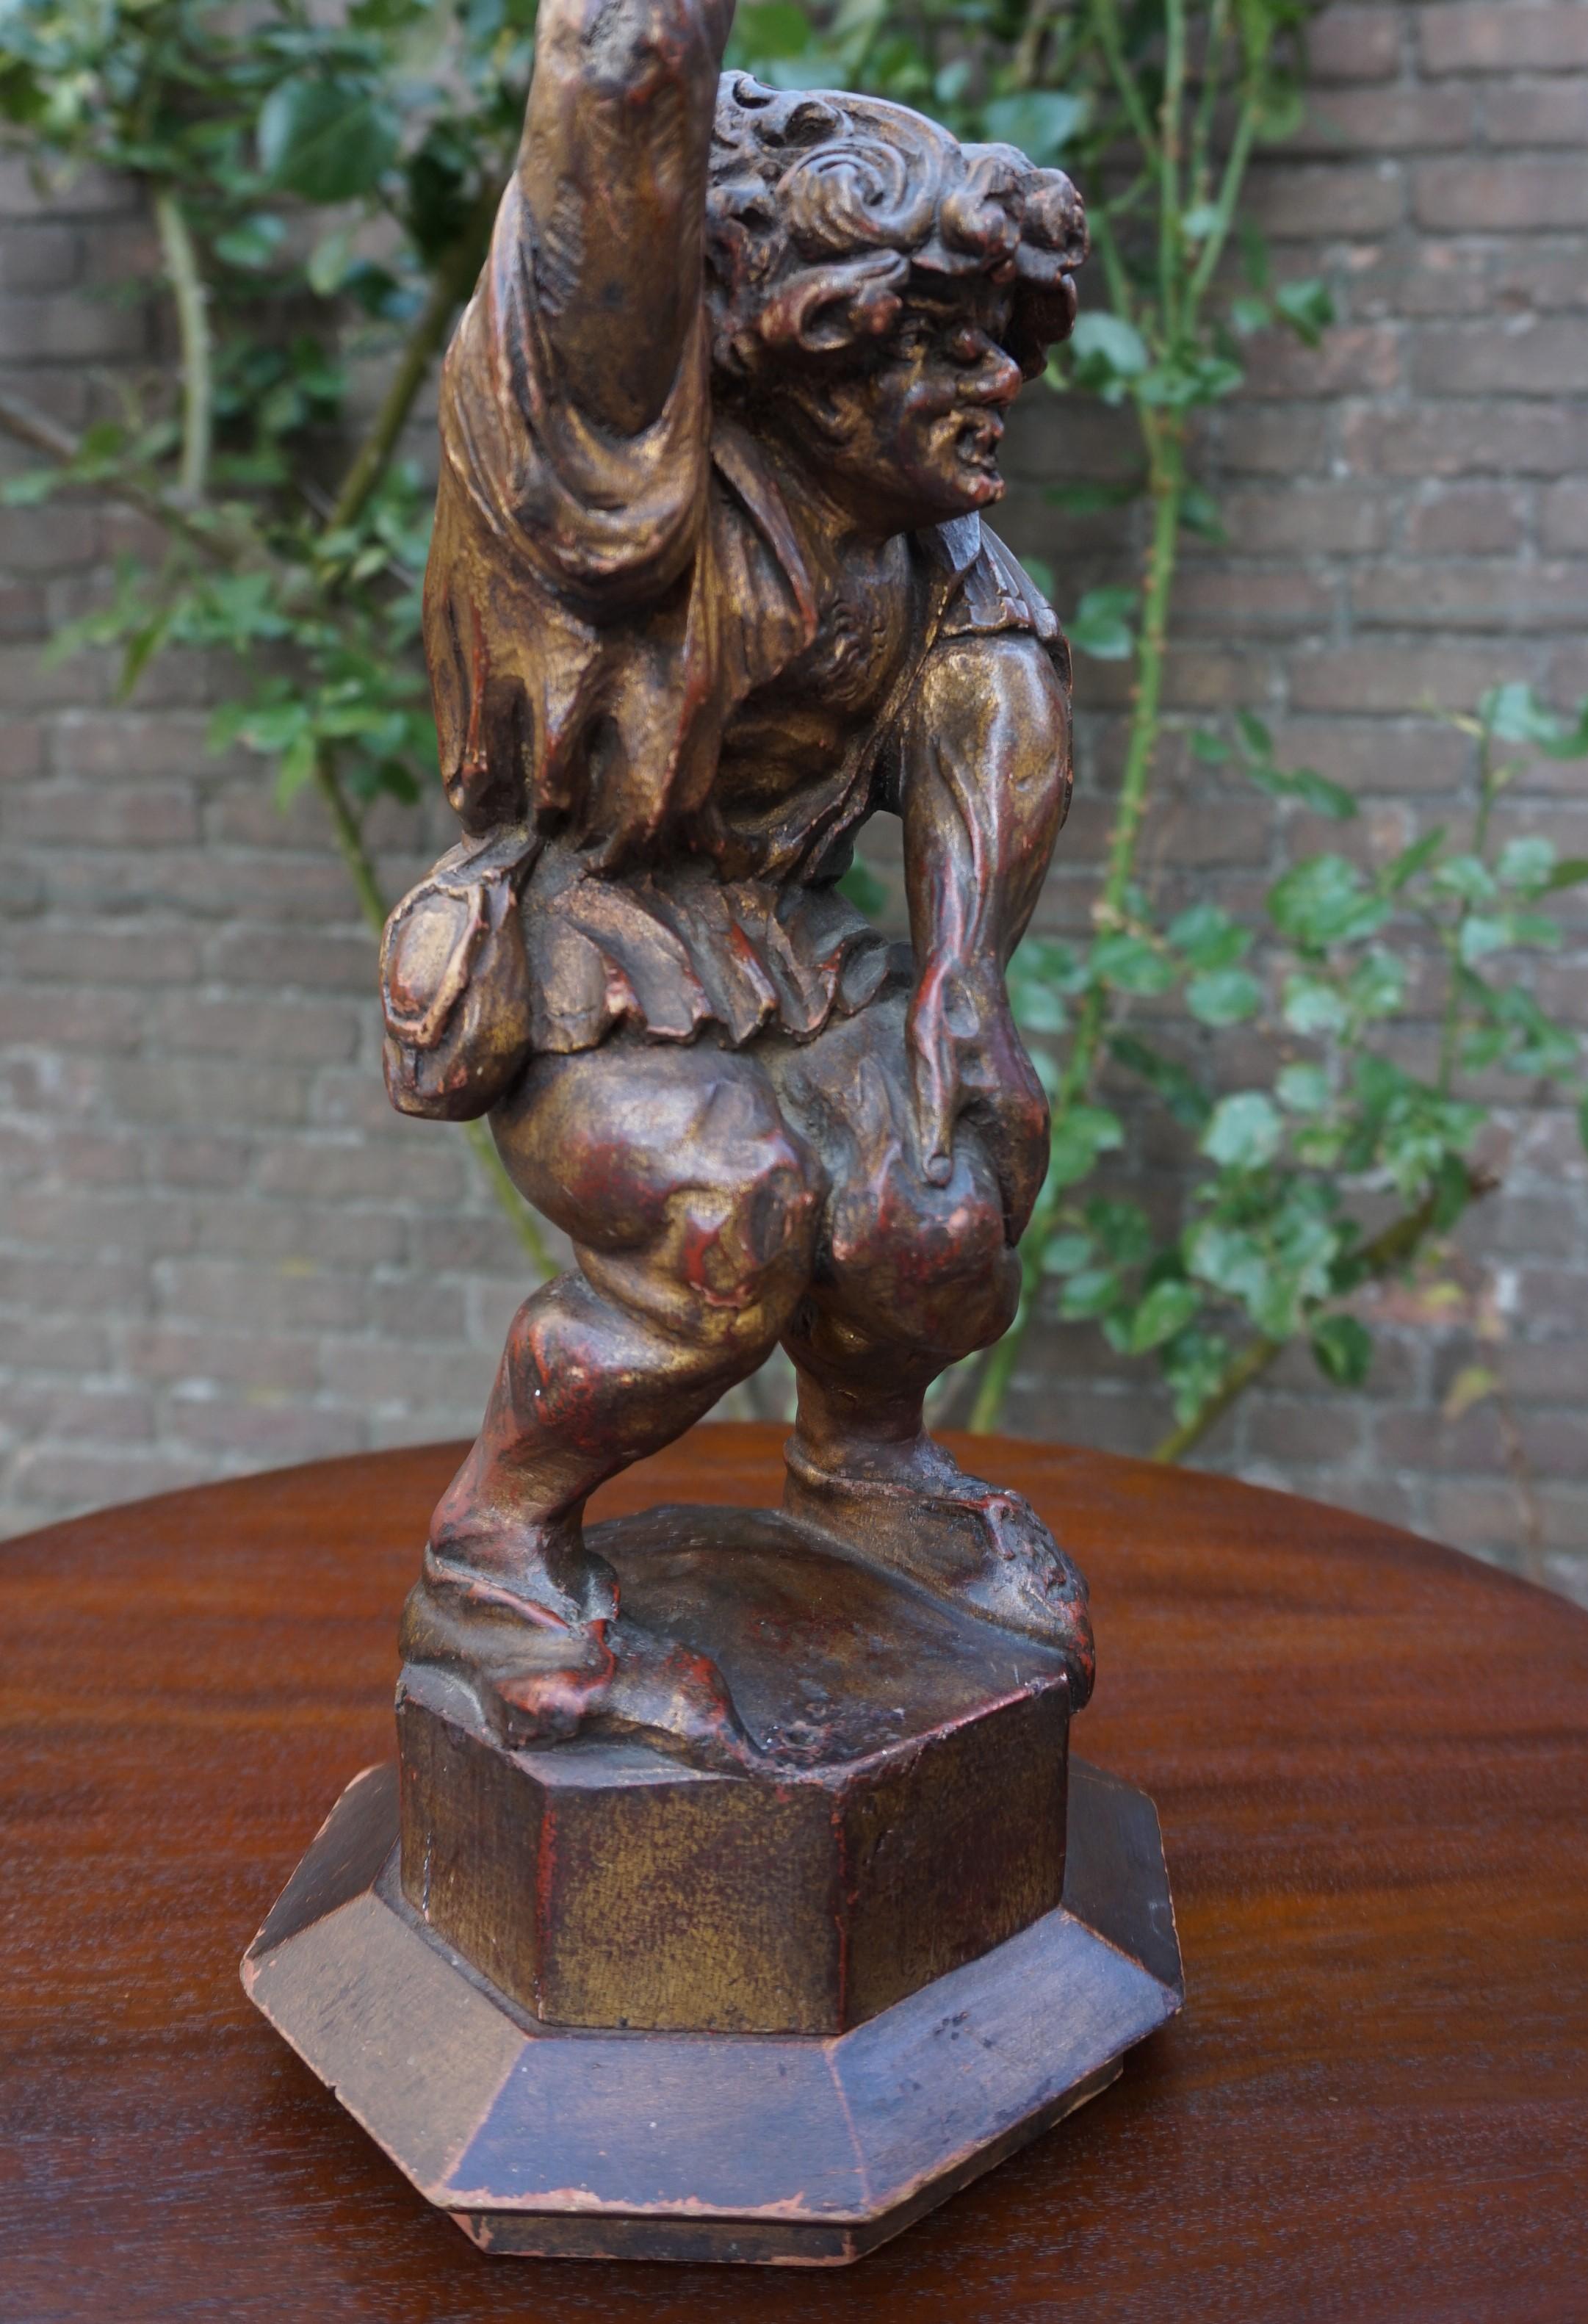 Antique Hand-Carved Gothic Style Quasimodo / Hunchback of Notre Dame  Sculpture For Sale at 1stDibs